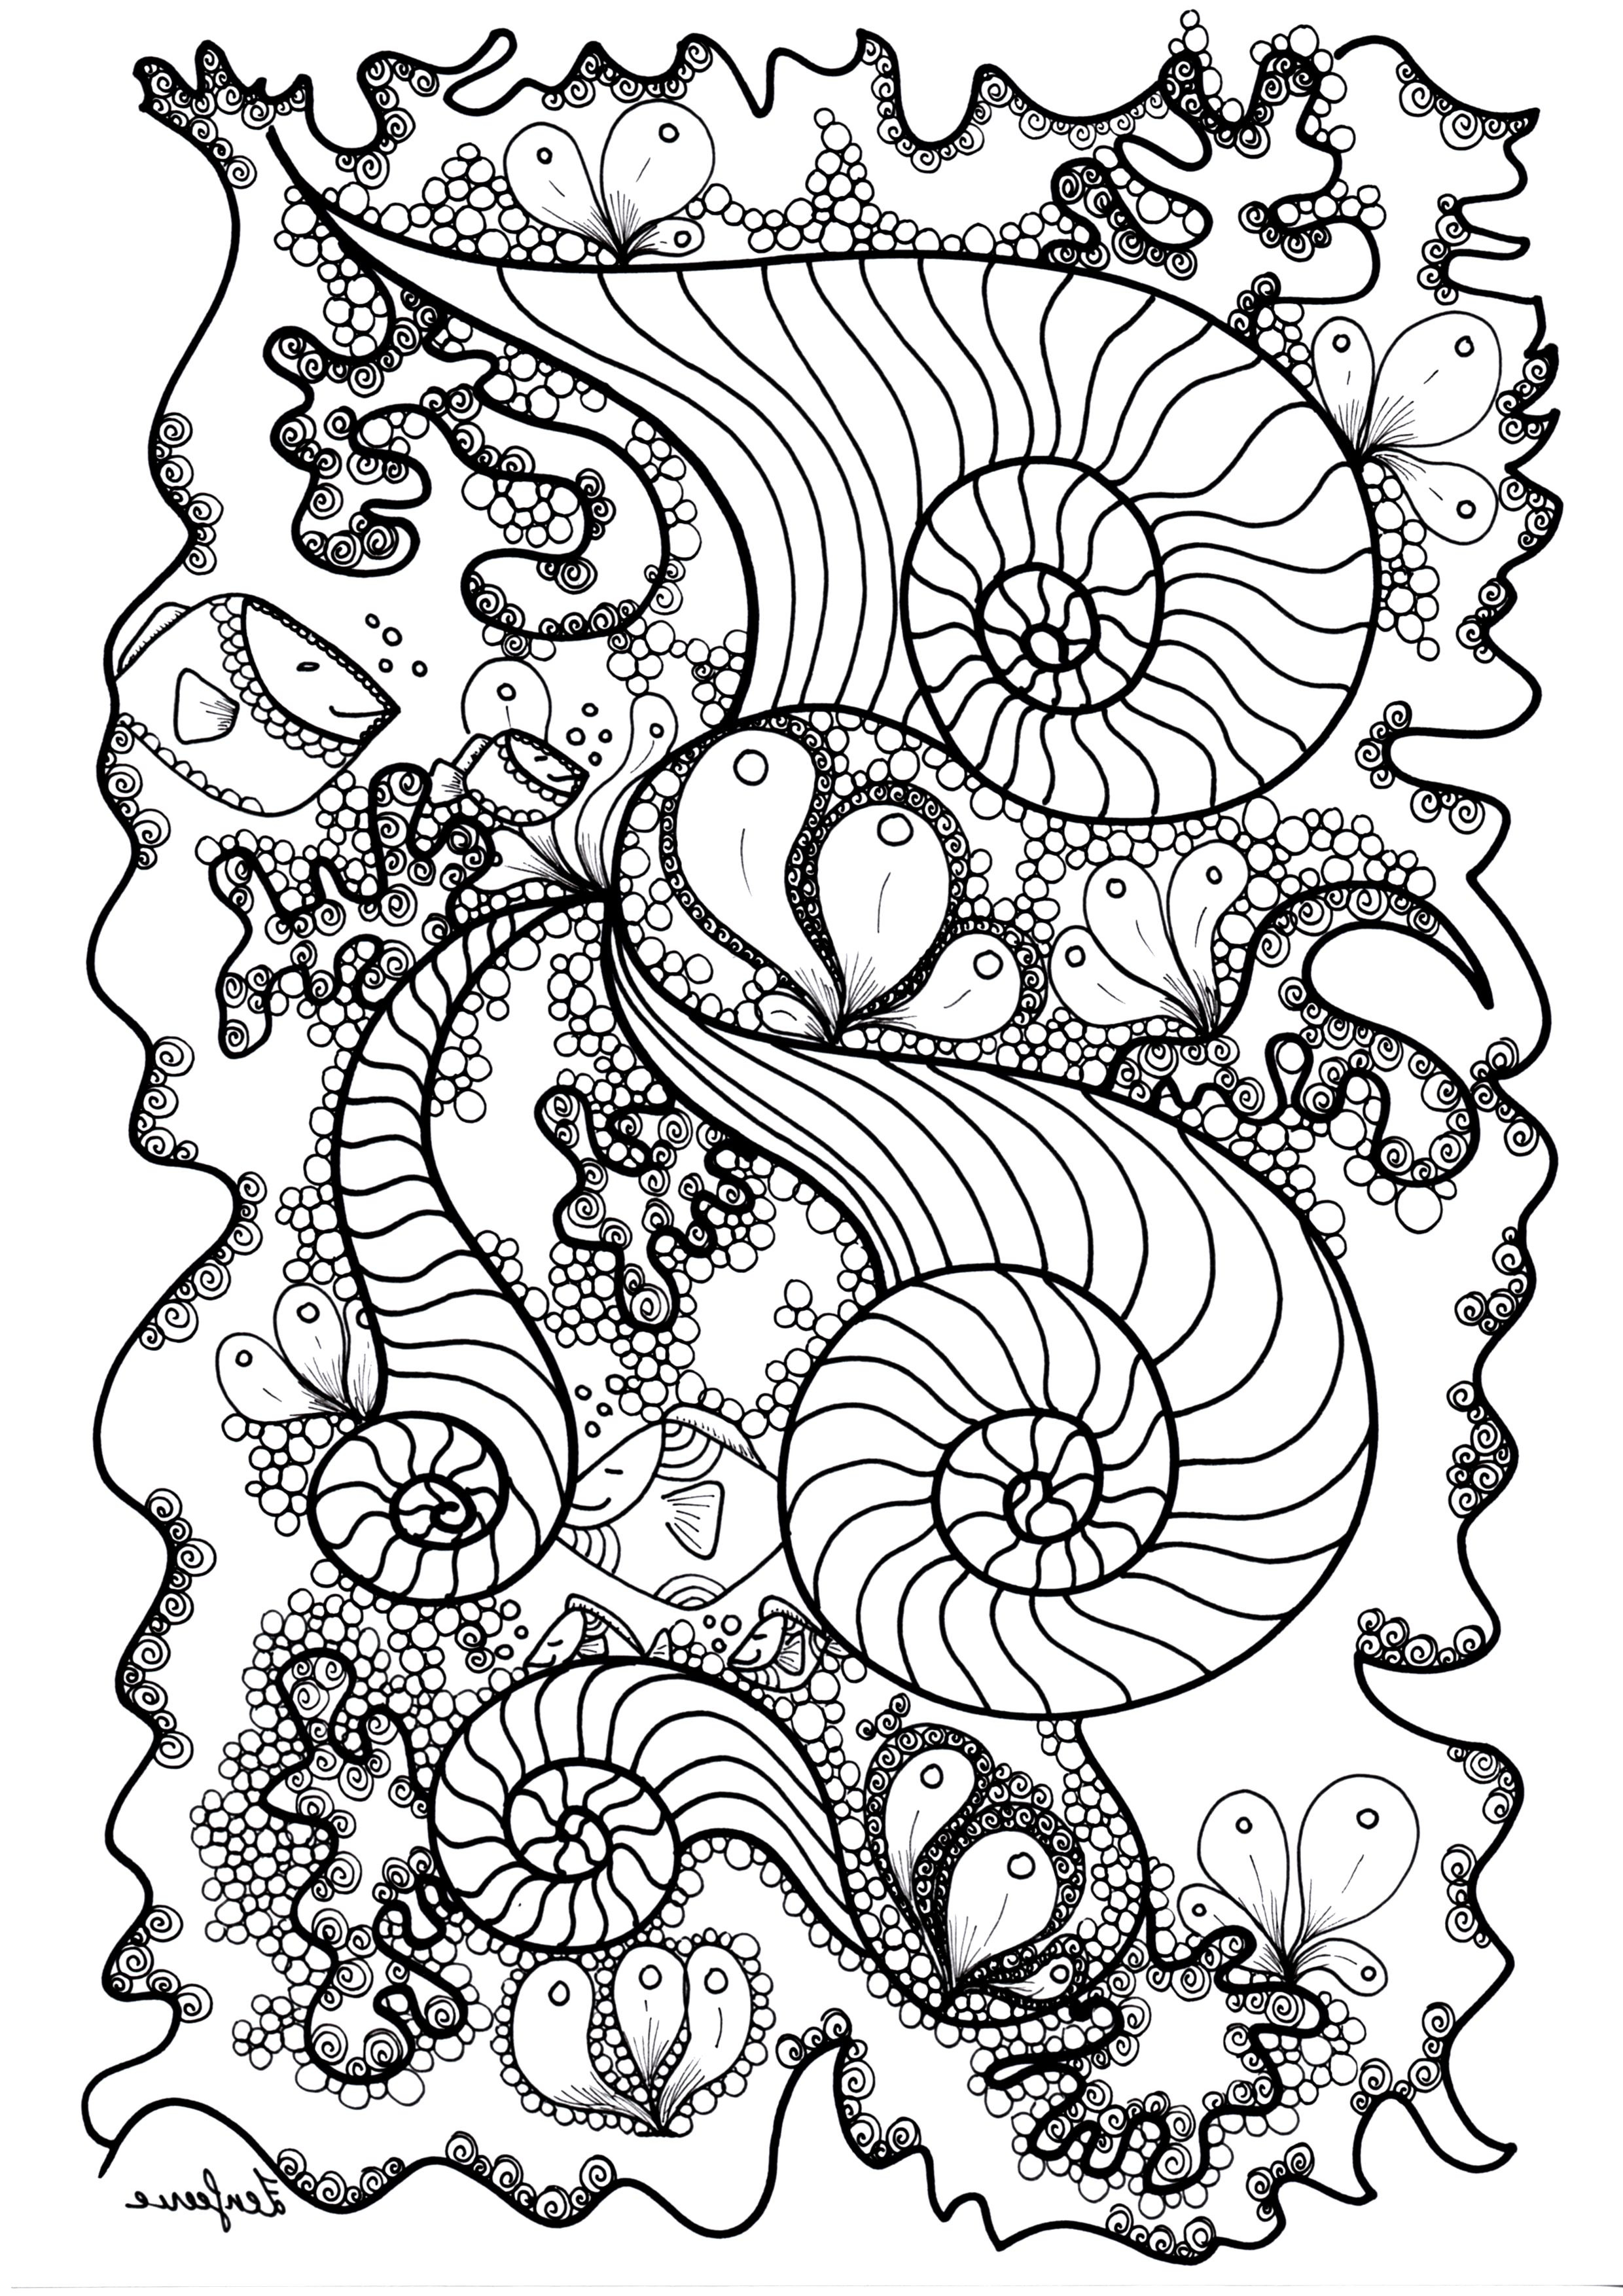 Coloriage Zen Adulte Beau Collection Poisson by Zenfeerie Zentangle Adult Coloring Pages